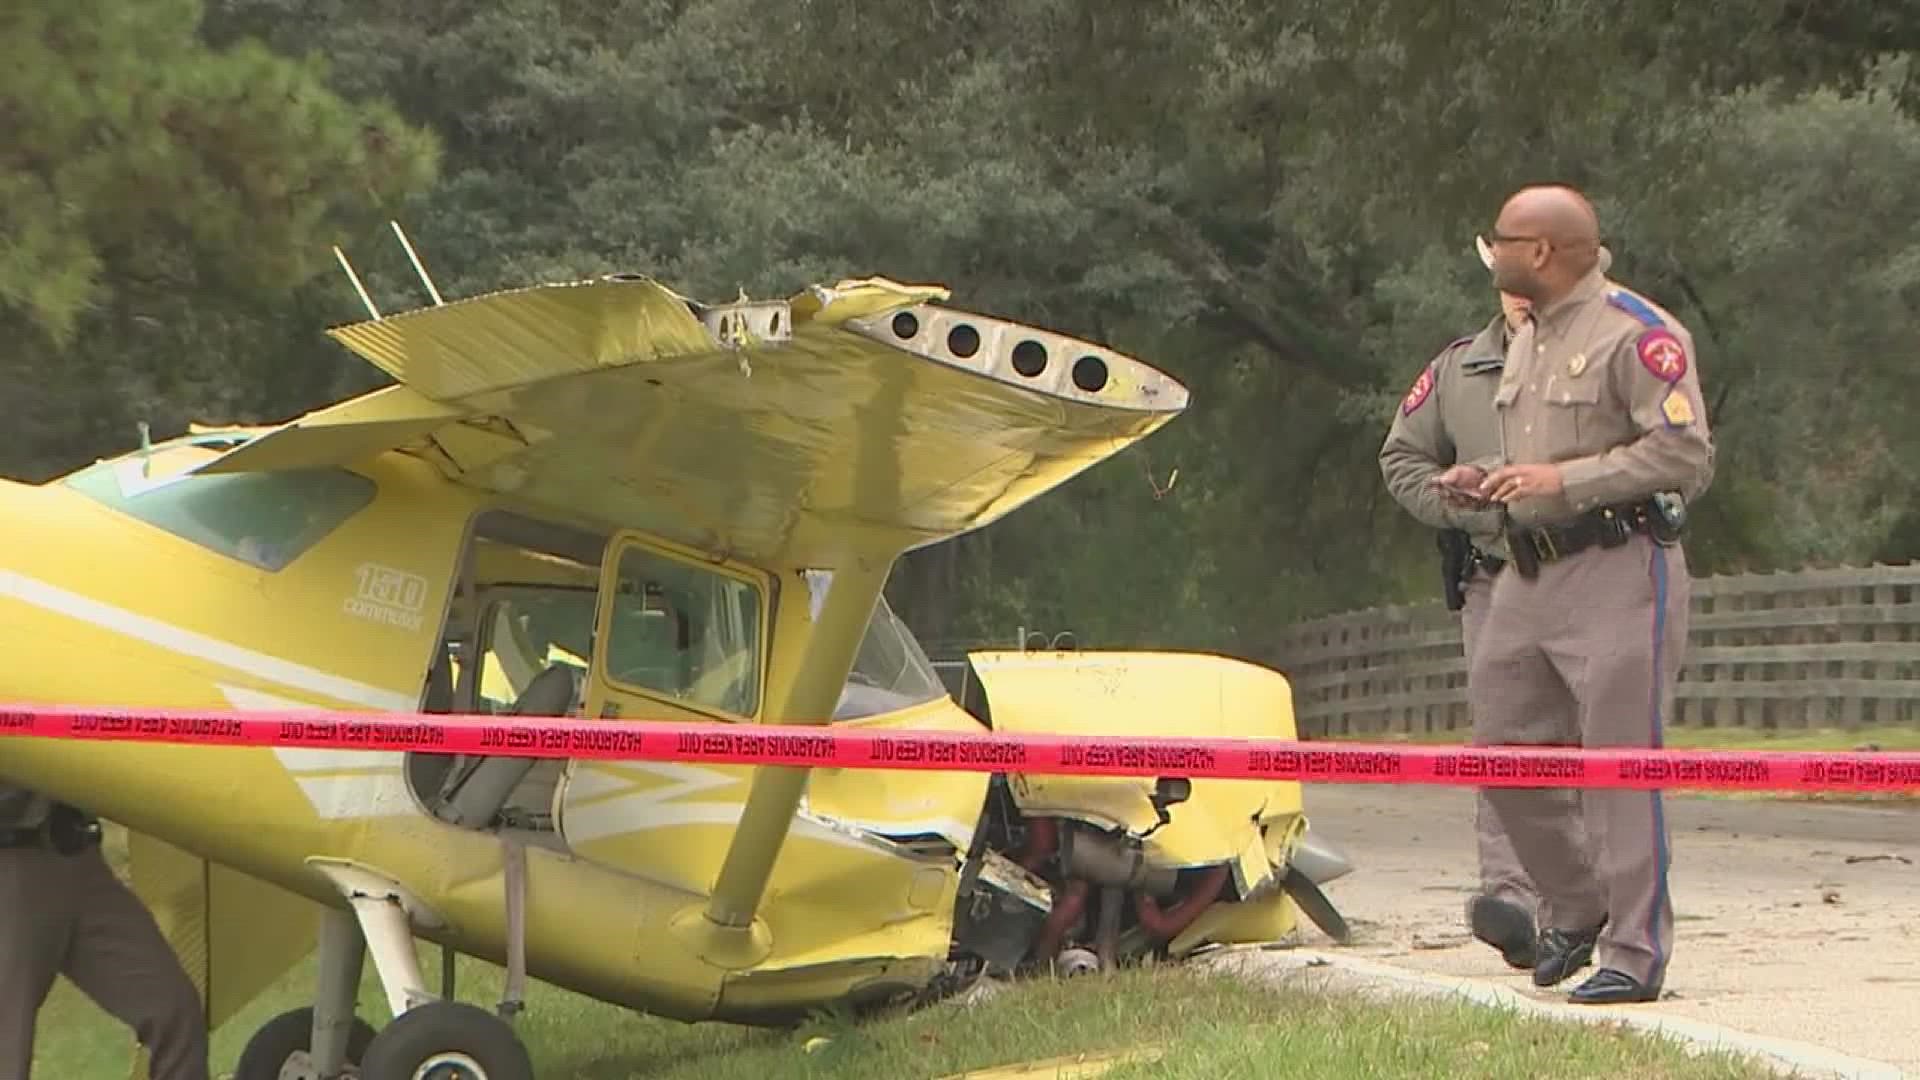 The plane took off in Cleveland and crashed in Cypress.